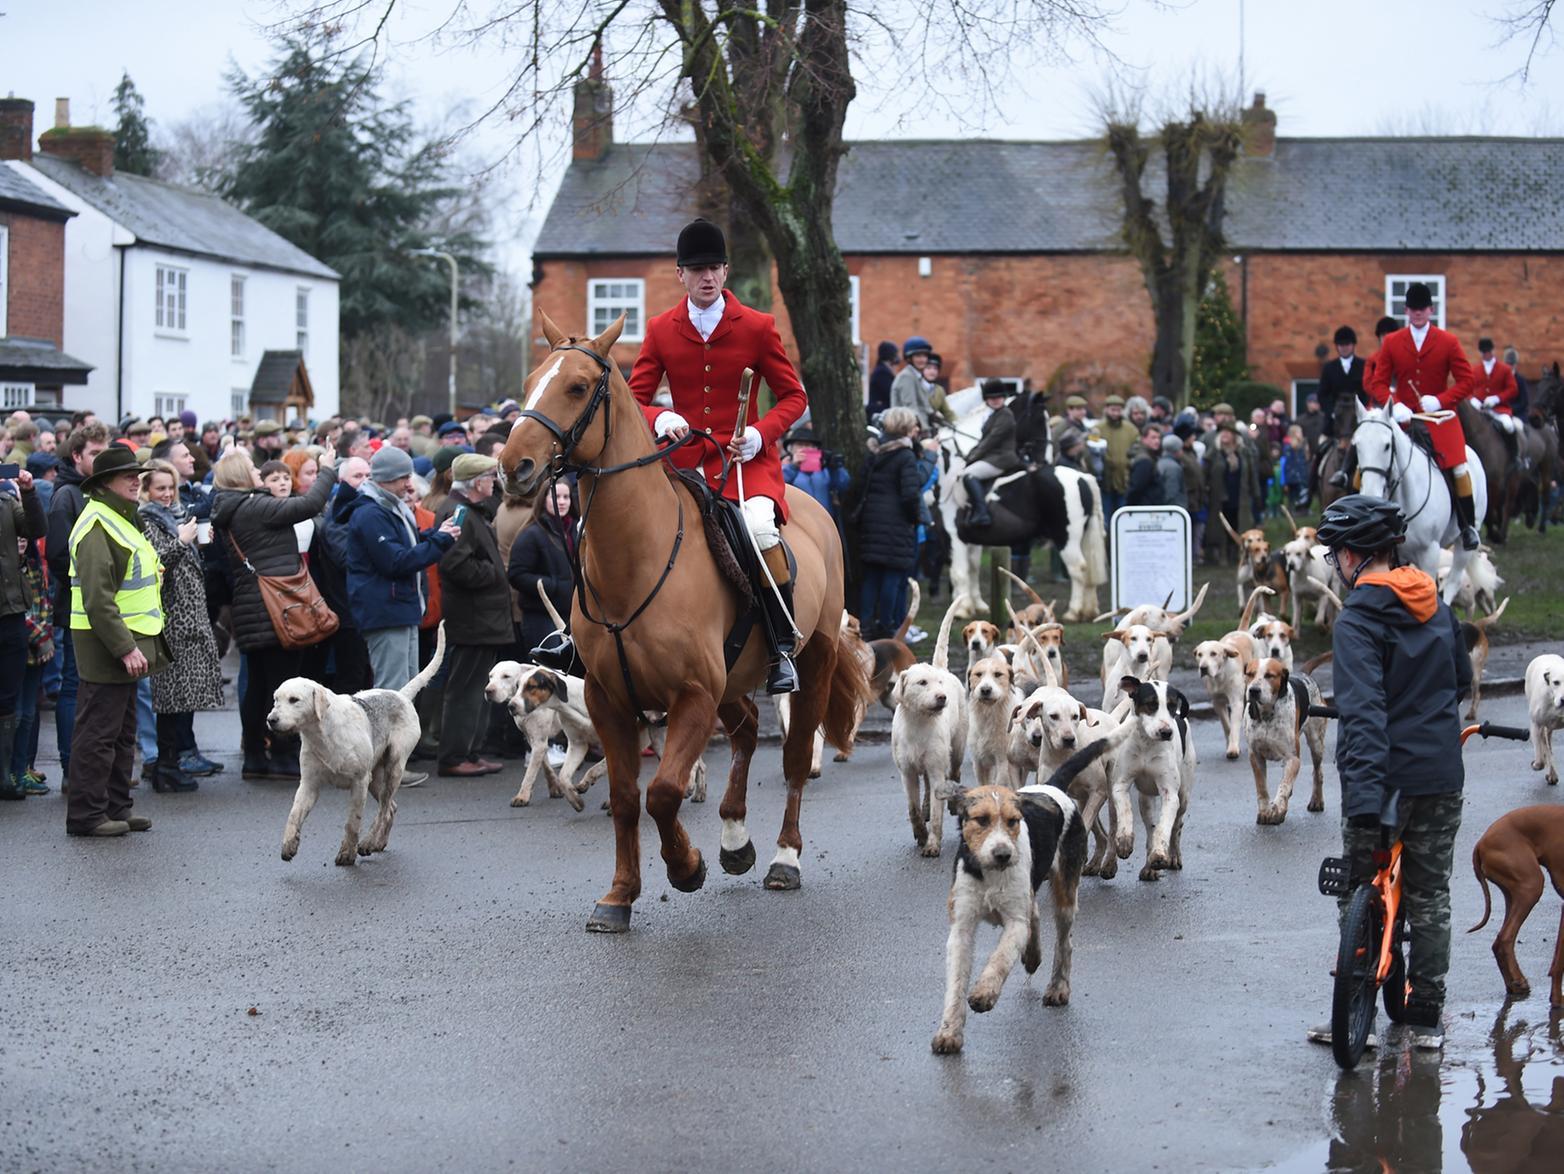 The Fernie Hunt sets off from the Green in Great Bowden on Boxing Day.